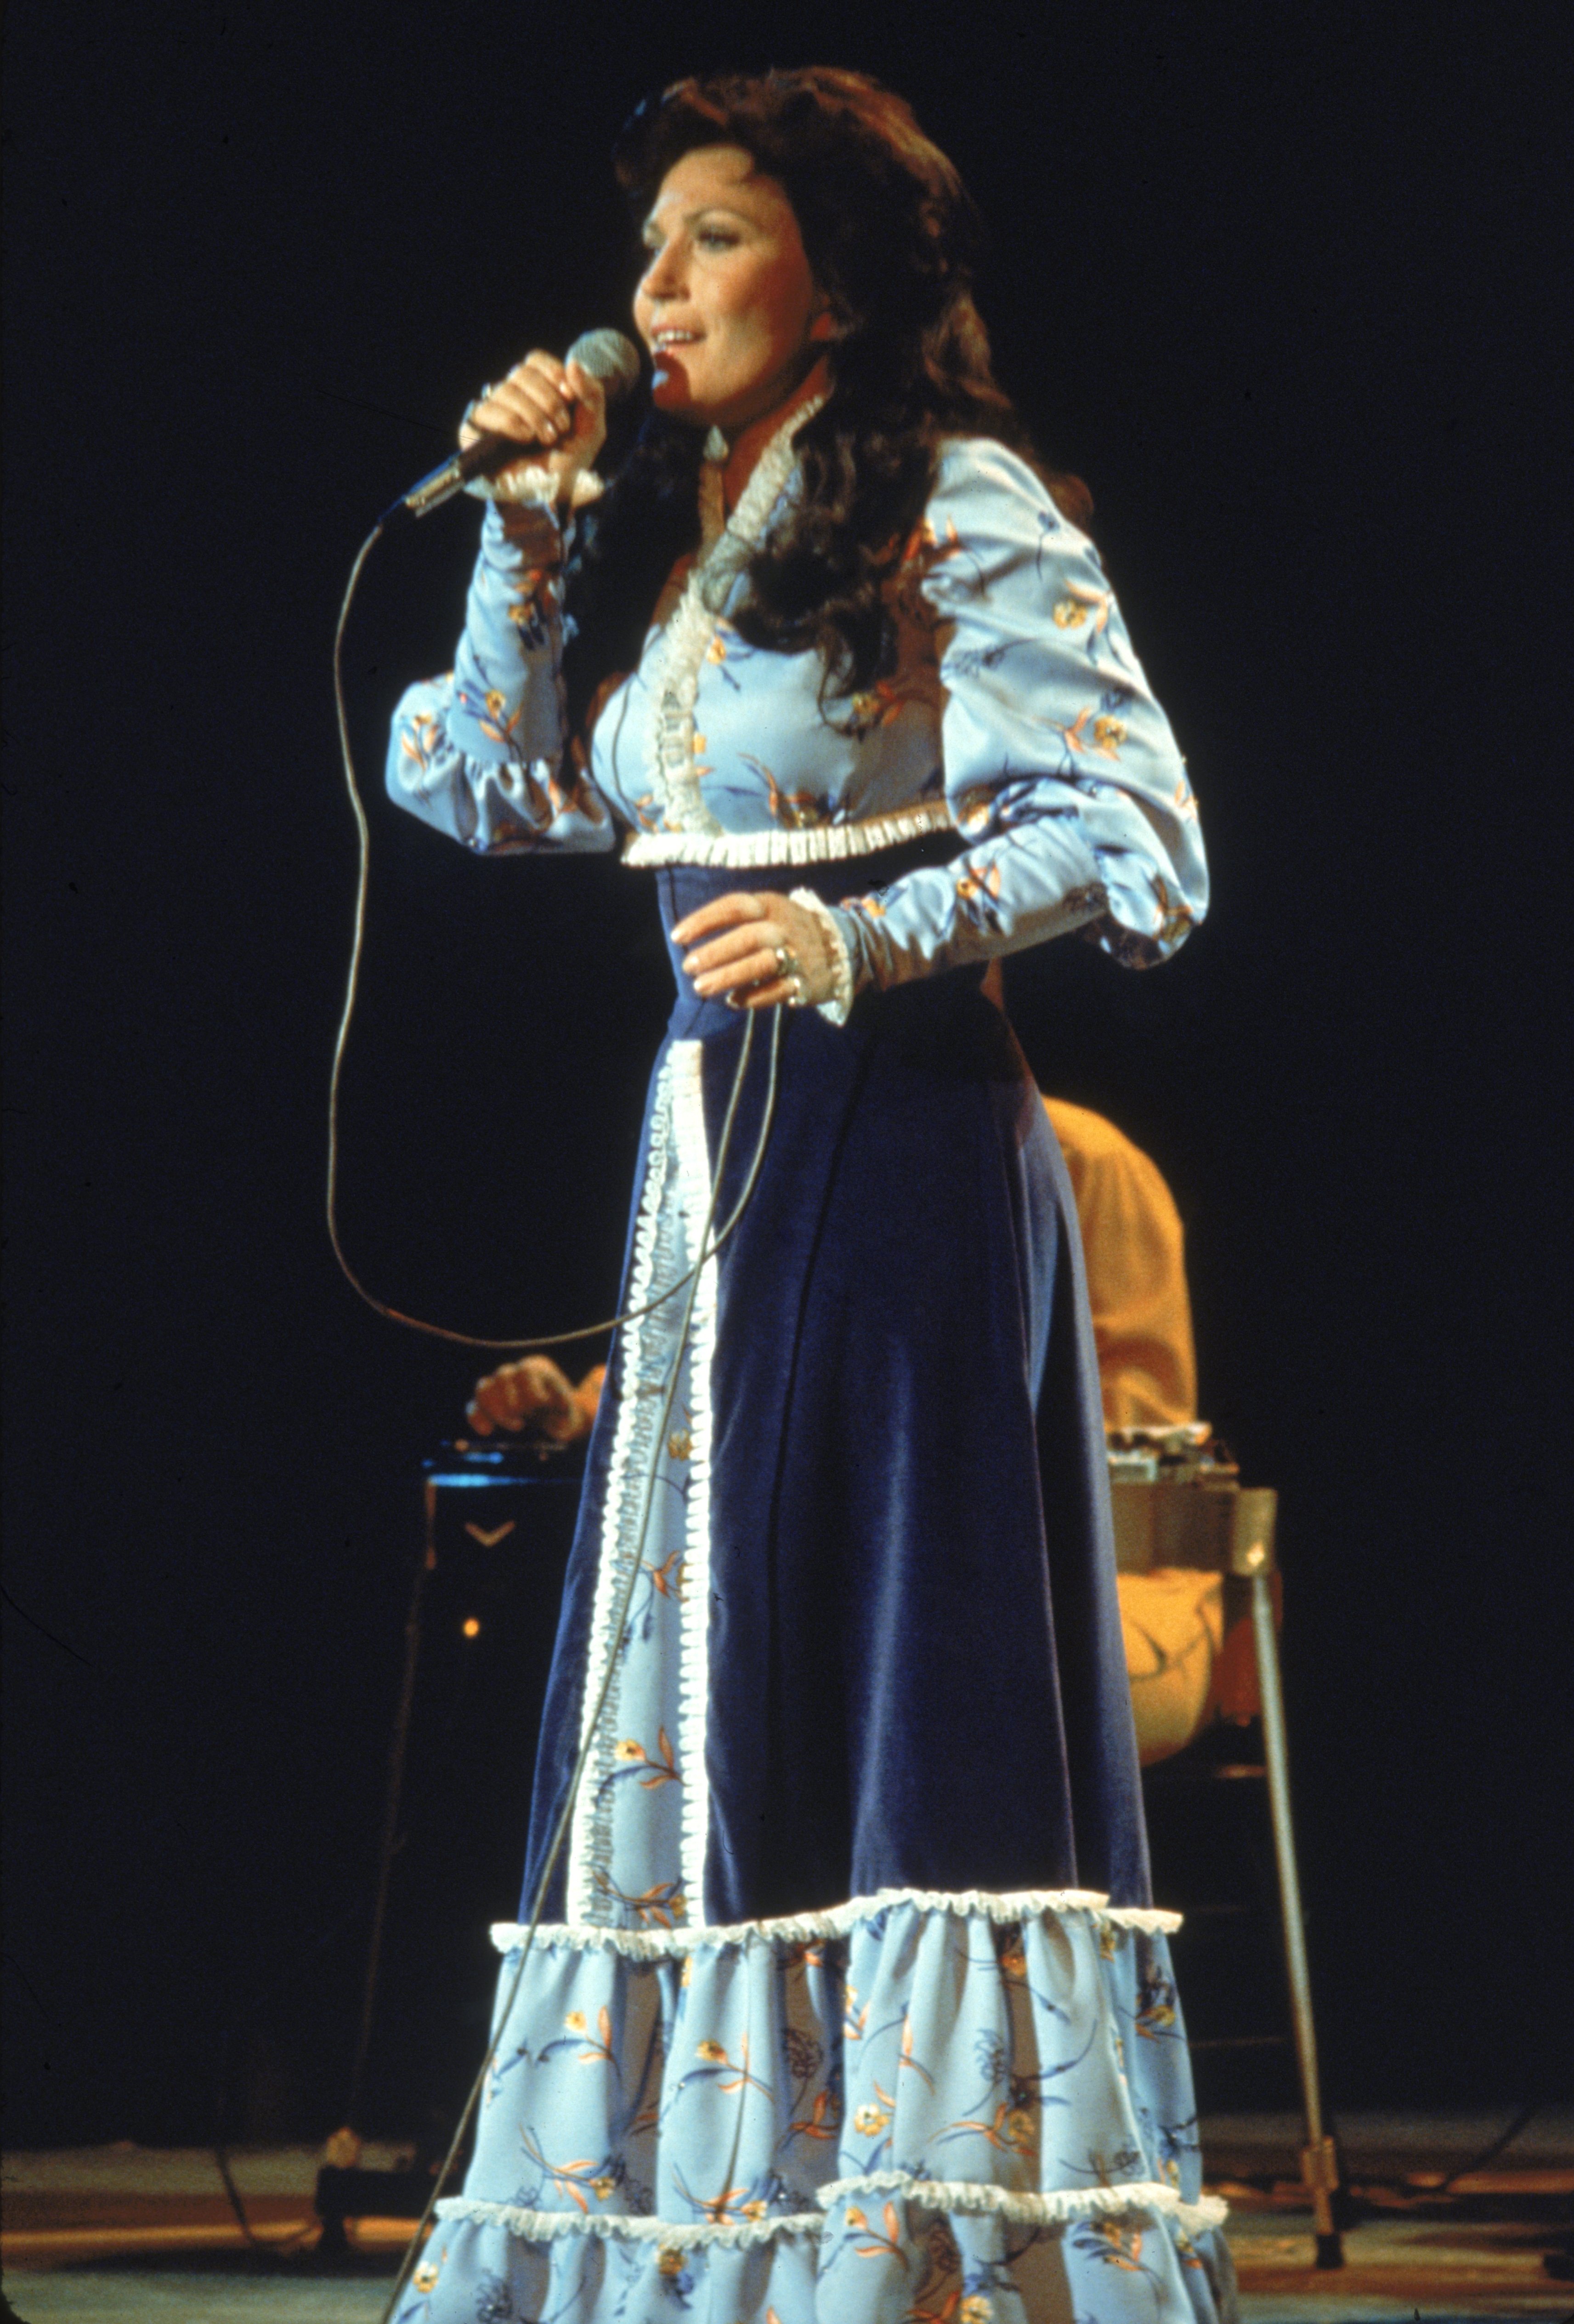 Loretta Lynn performs on stage, wearing a long dress in 1980. | Source: Getty Images